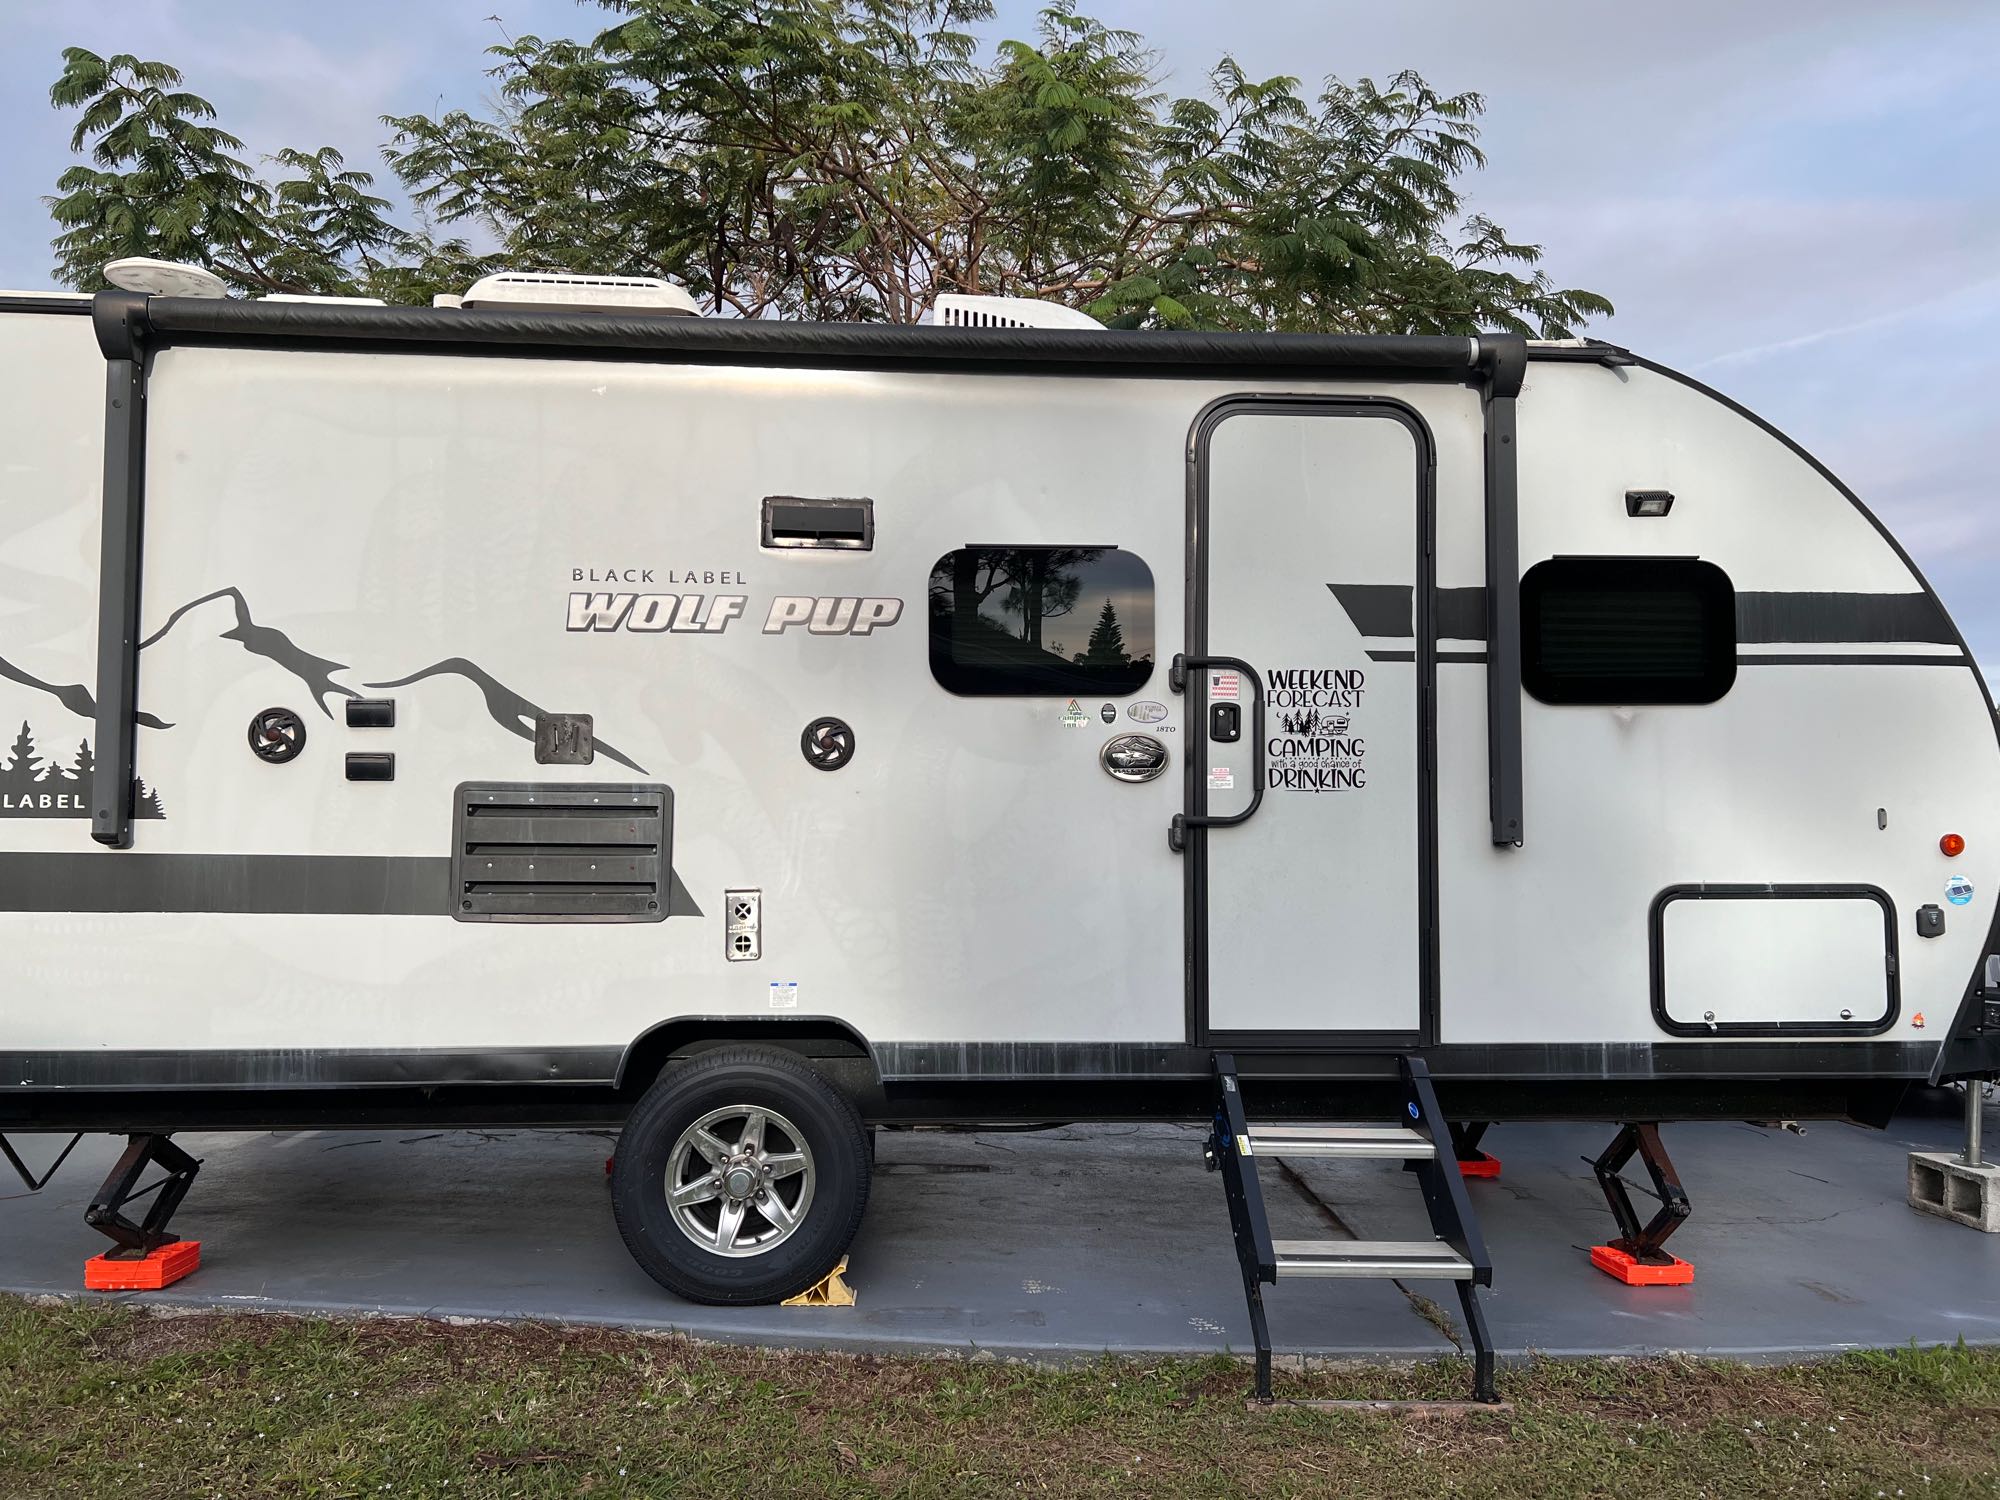 2019 Forest River Cherokee Wolf Pup Black Label Travel trailer Rental in  Port Saint Lucie, FL | Outdoorsy